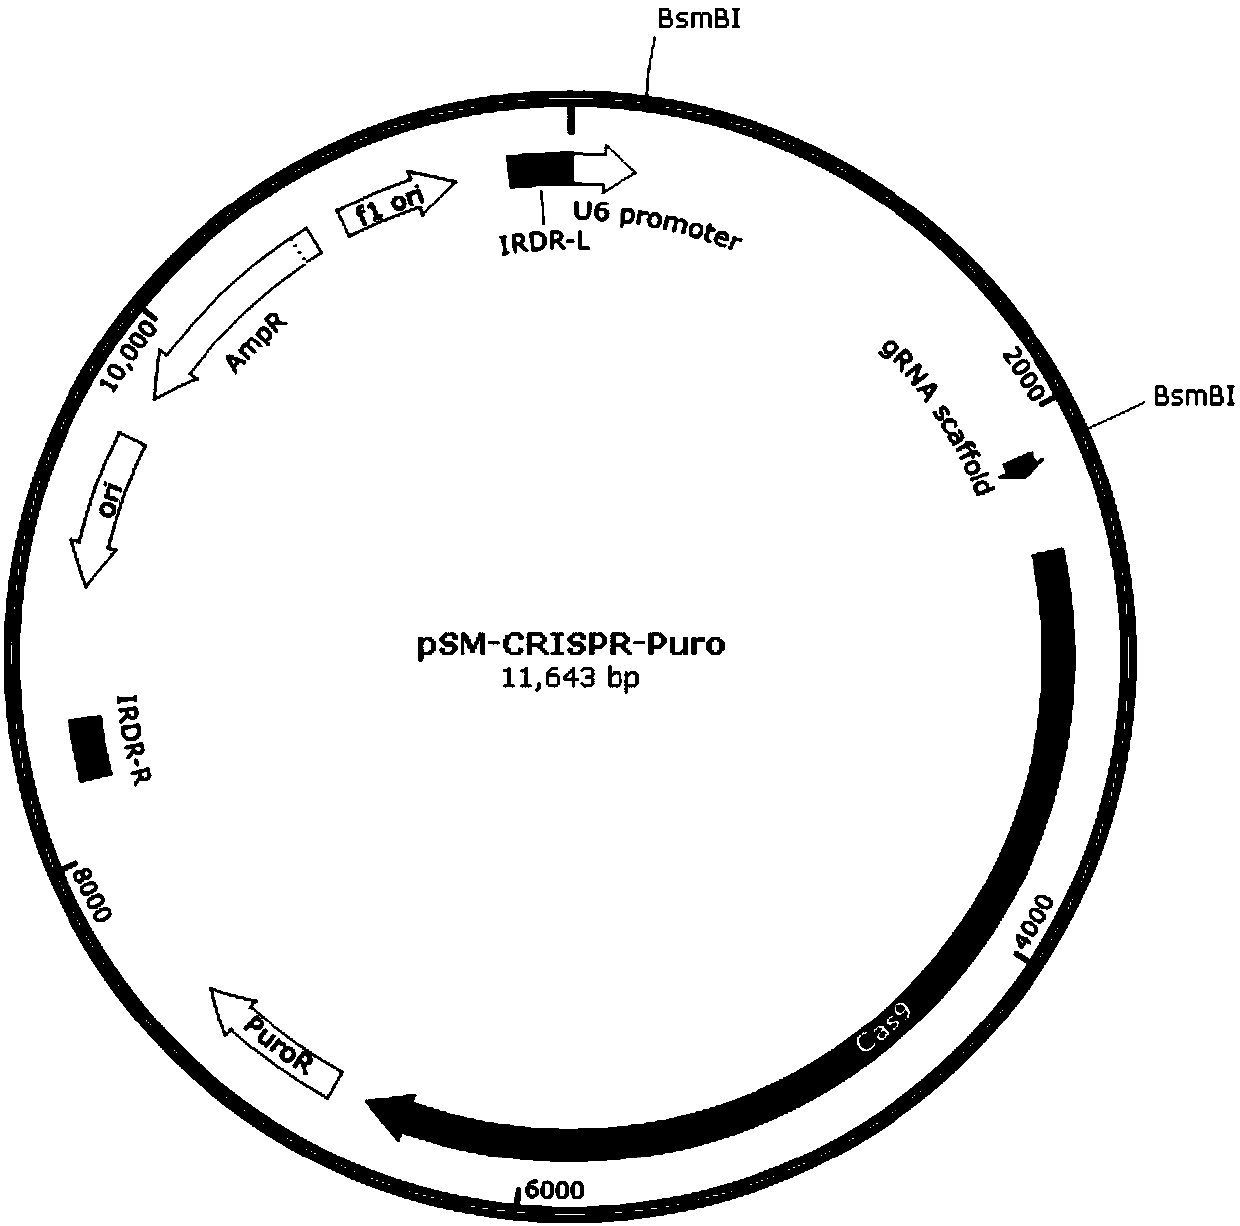 Stable knockout single plasmid vector with coordination of transposon and CRISPR/Cas9 system and application of stable knockout single plasmid vector